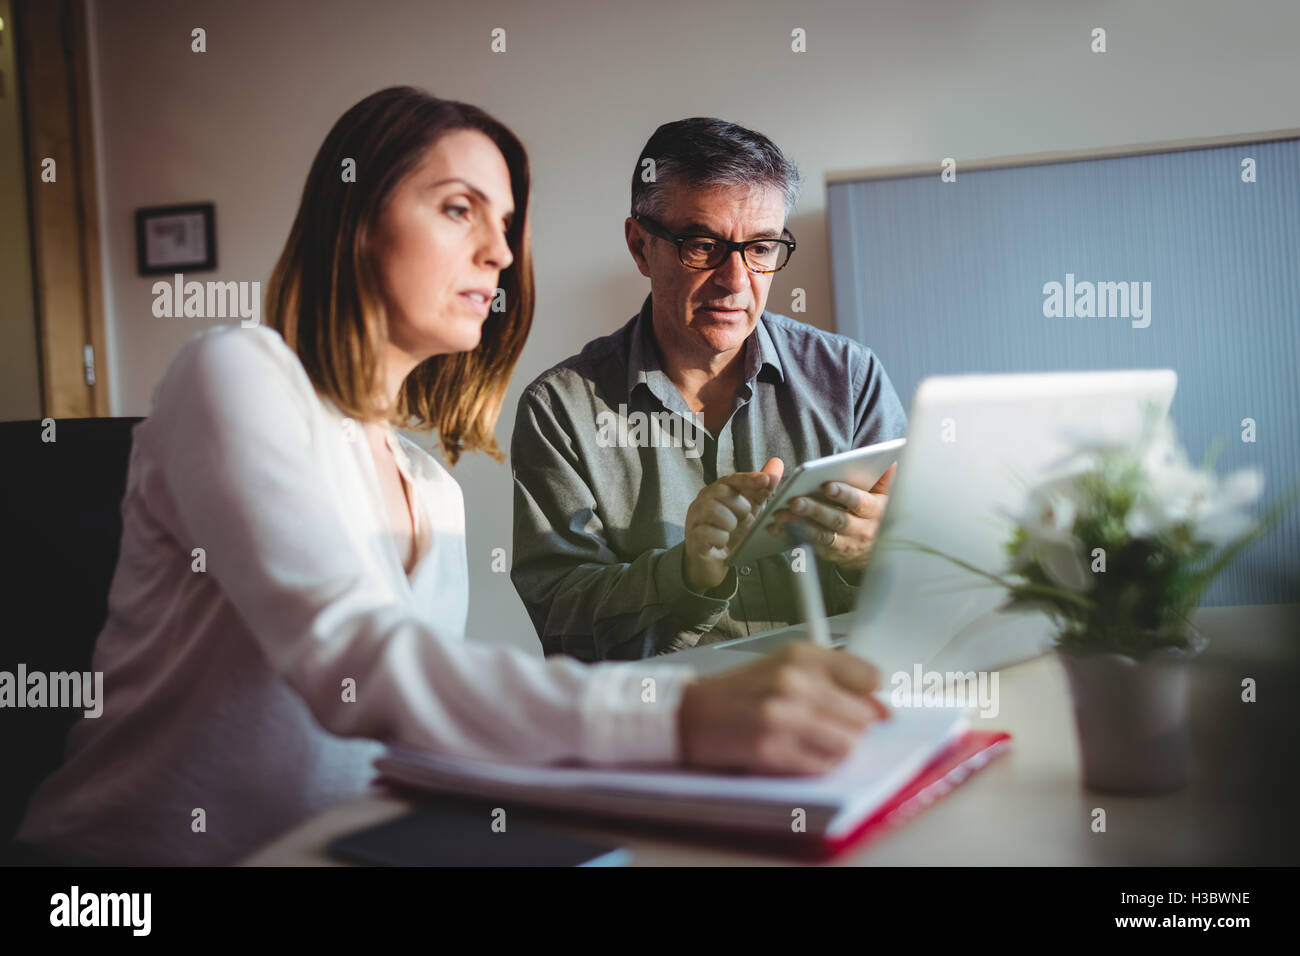 Man and woman discussing over digital tablet and laptop Stock Photo